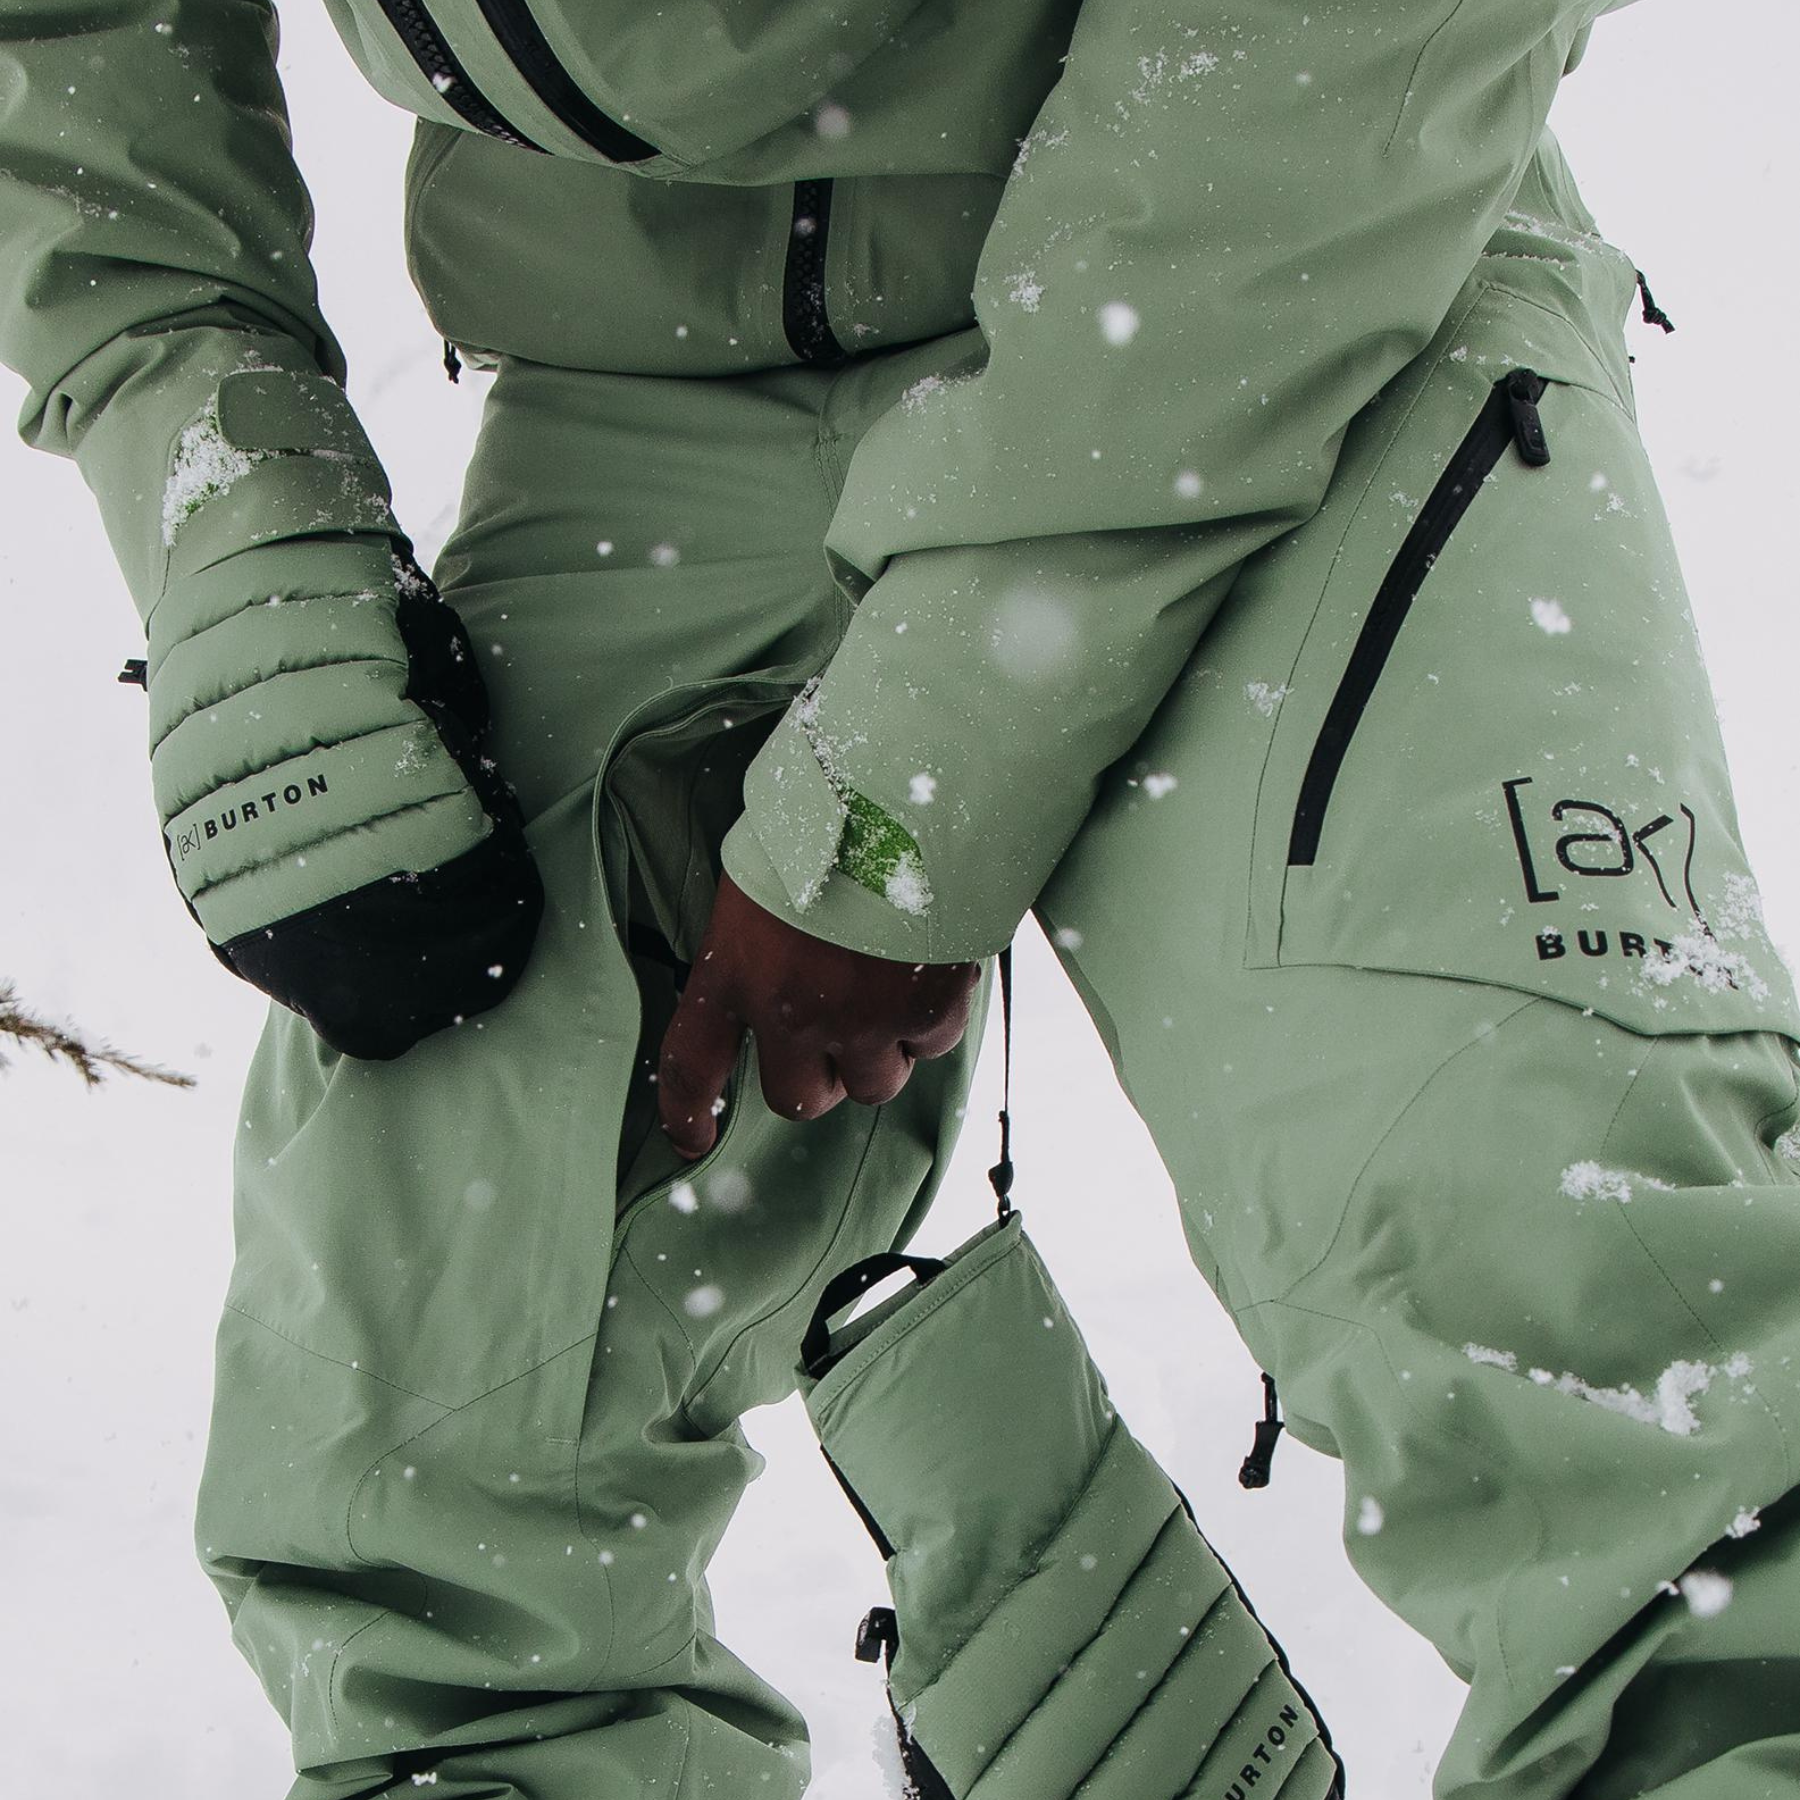 GORE-TEX: THE COMPLETE GUIDE AND WHY IT’S BECOMING AN INDUSTRY FAVOURITE